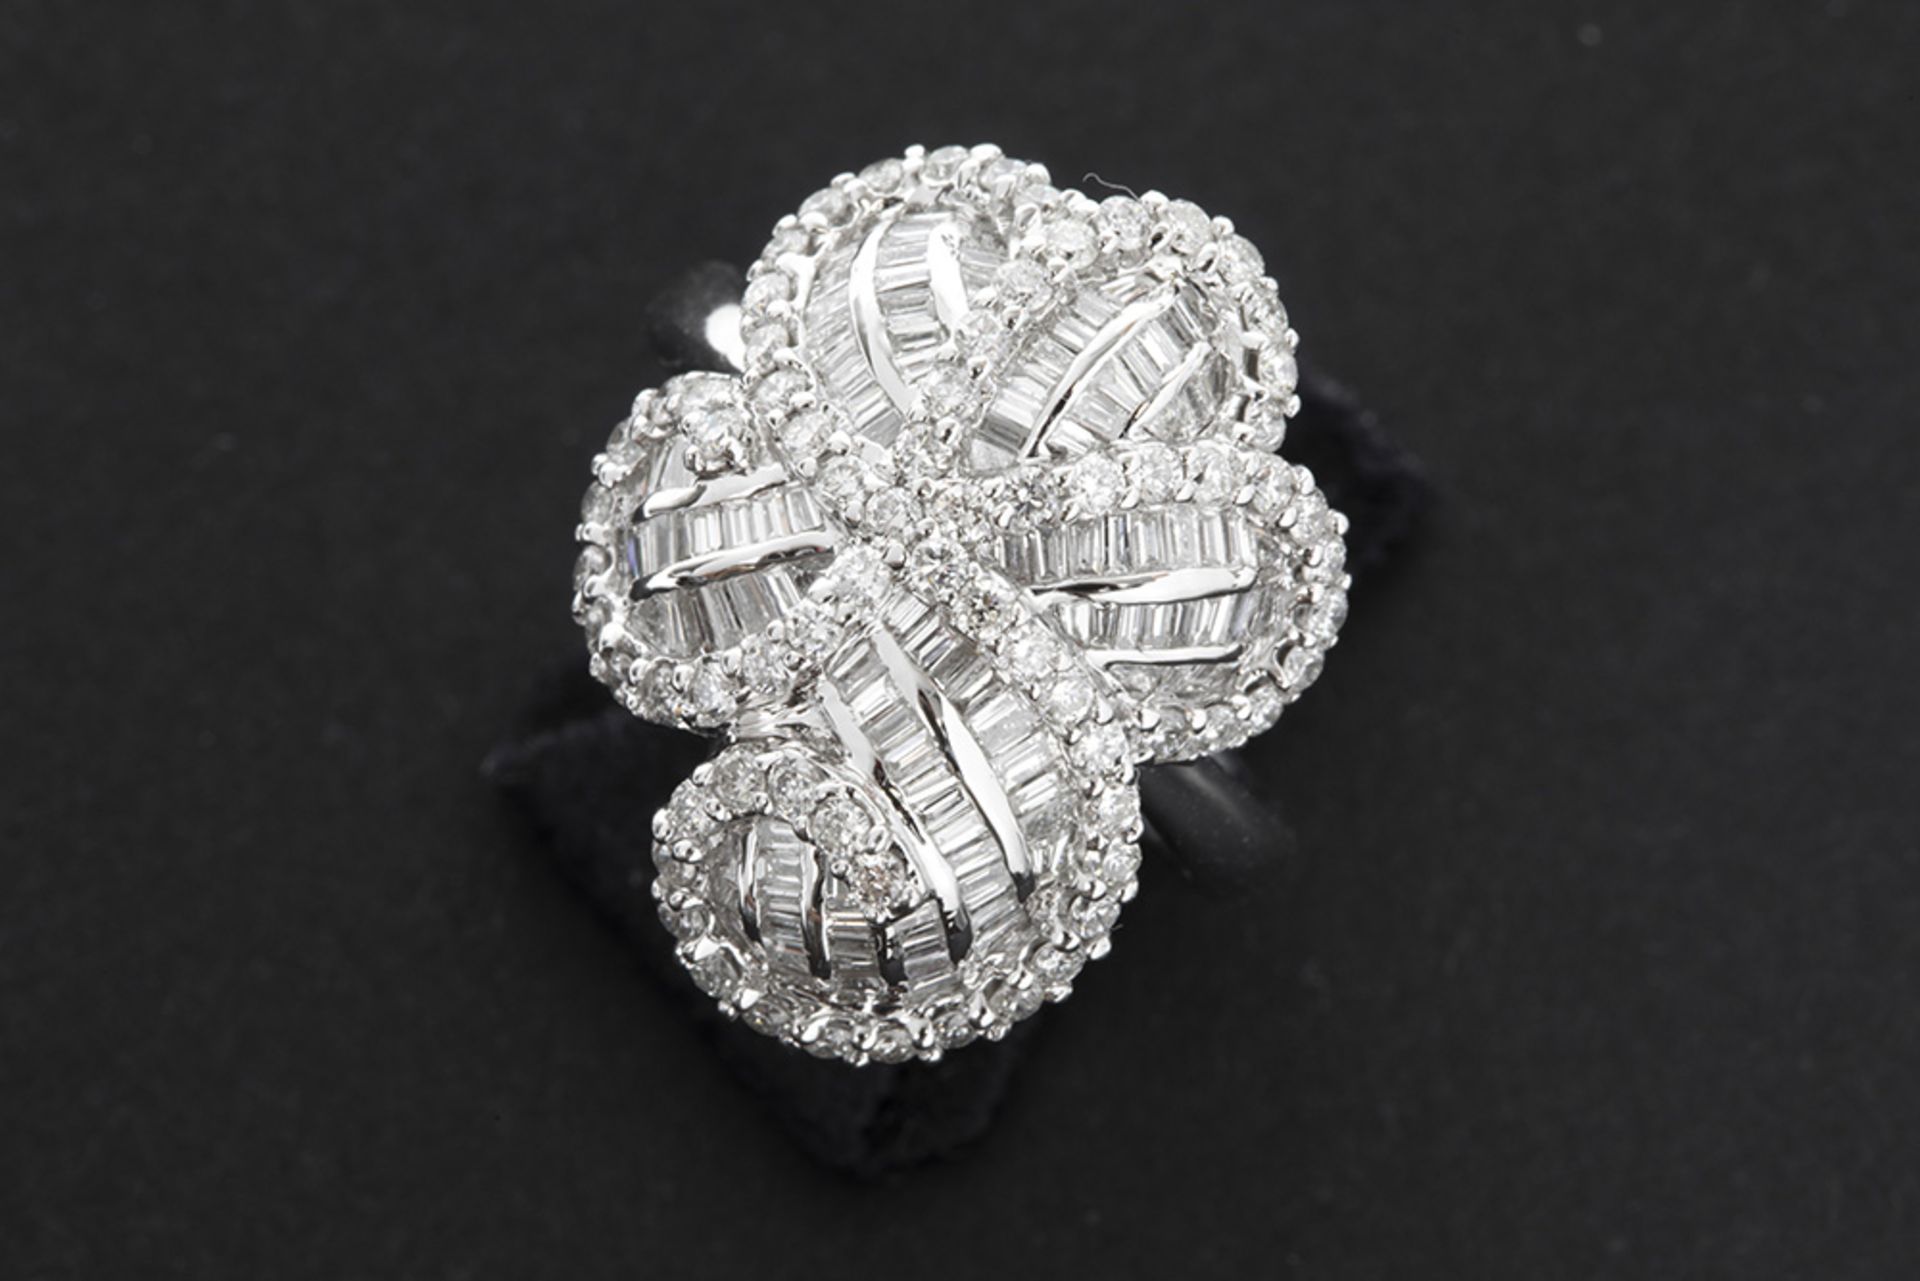 ring in white gold (18 carat) with 1,75 carat of high quality brilliant and baguette cut diamonds ||